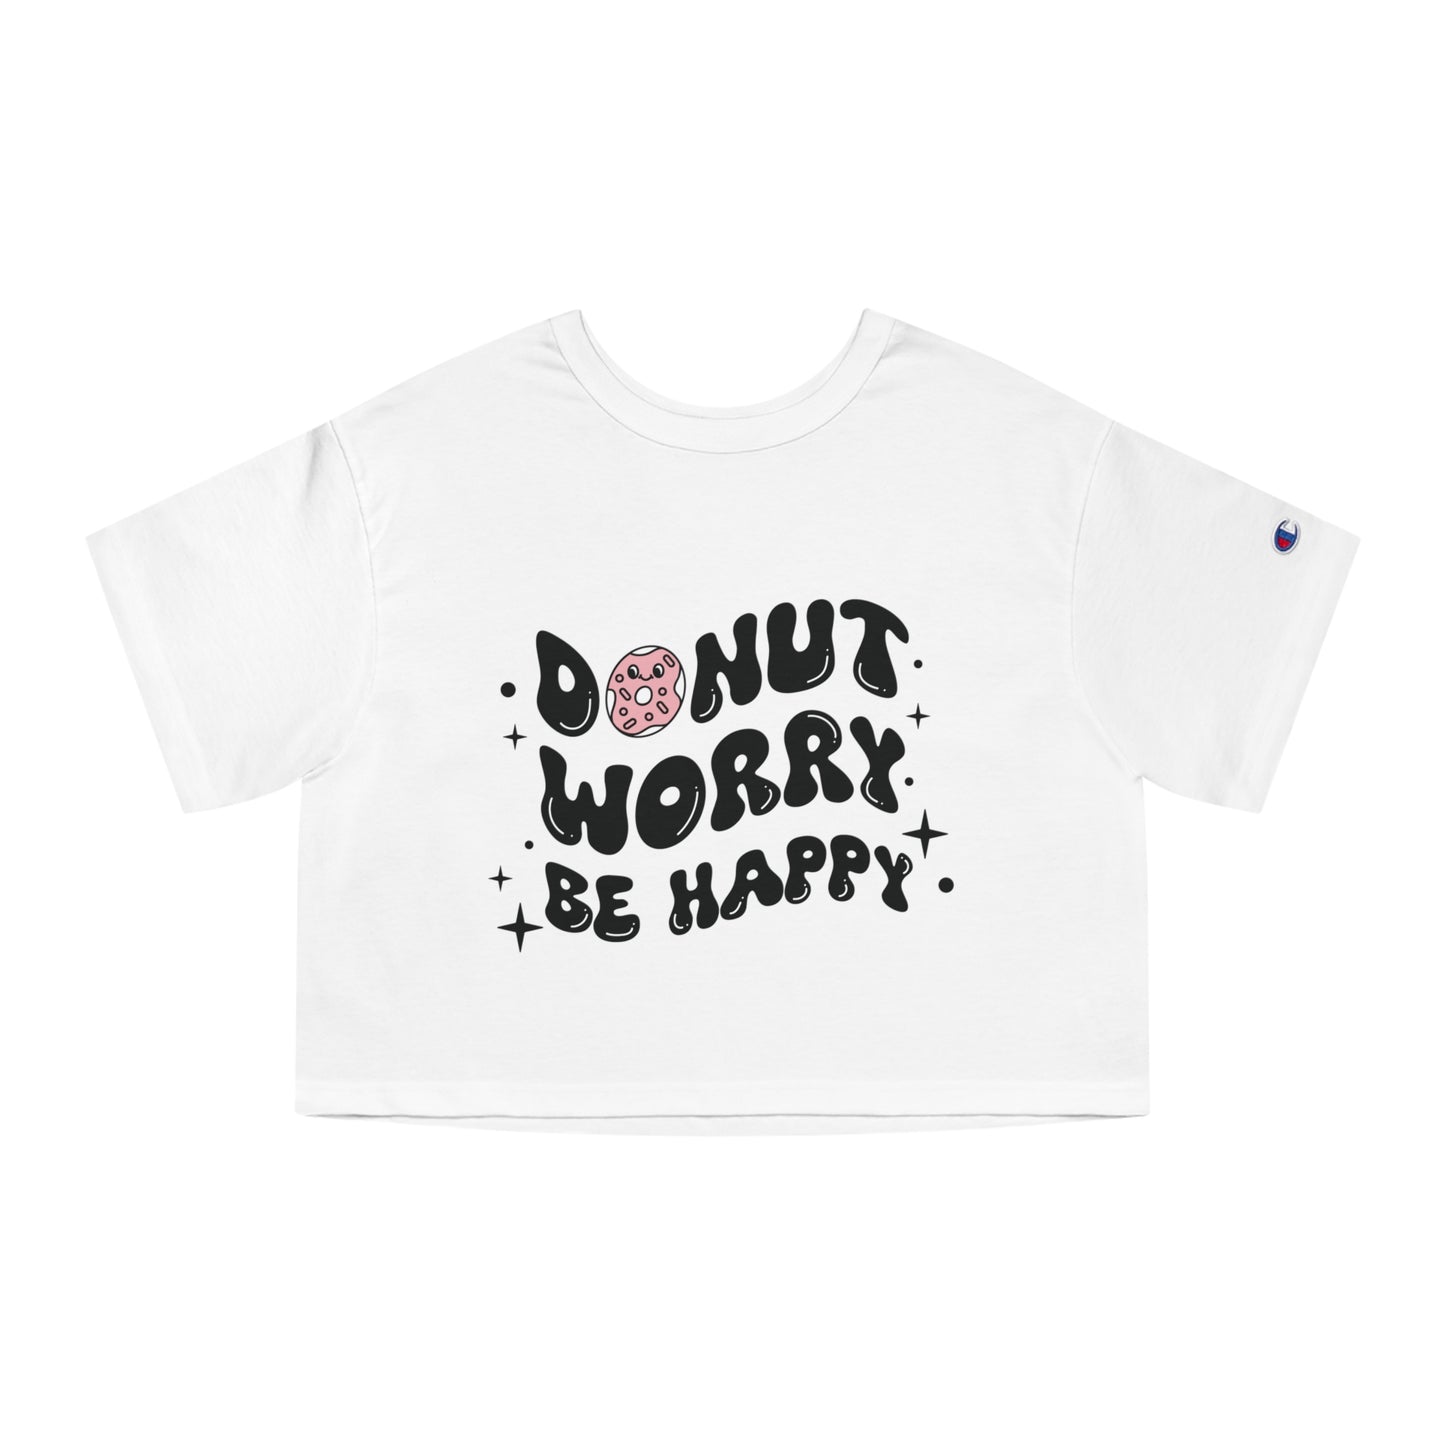 "Donut Worry Be Happy" Champion Women's Heritage Cropped T-Shirt